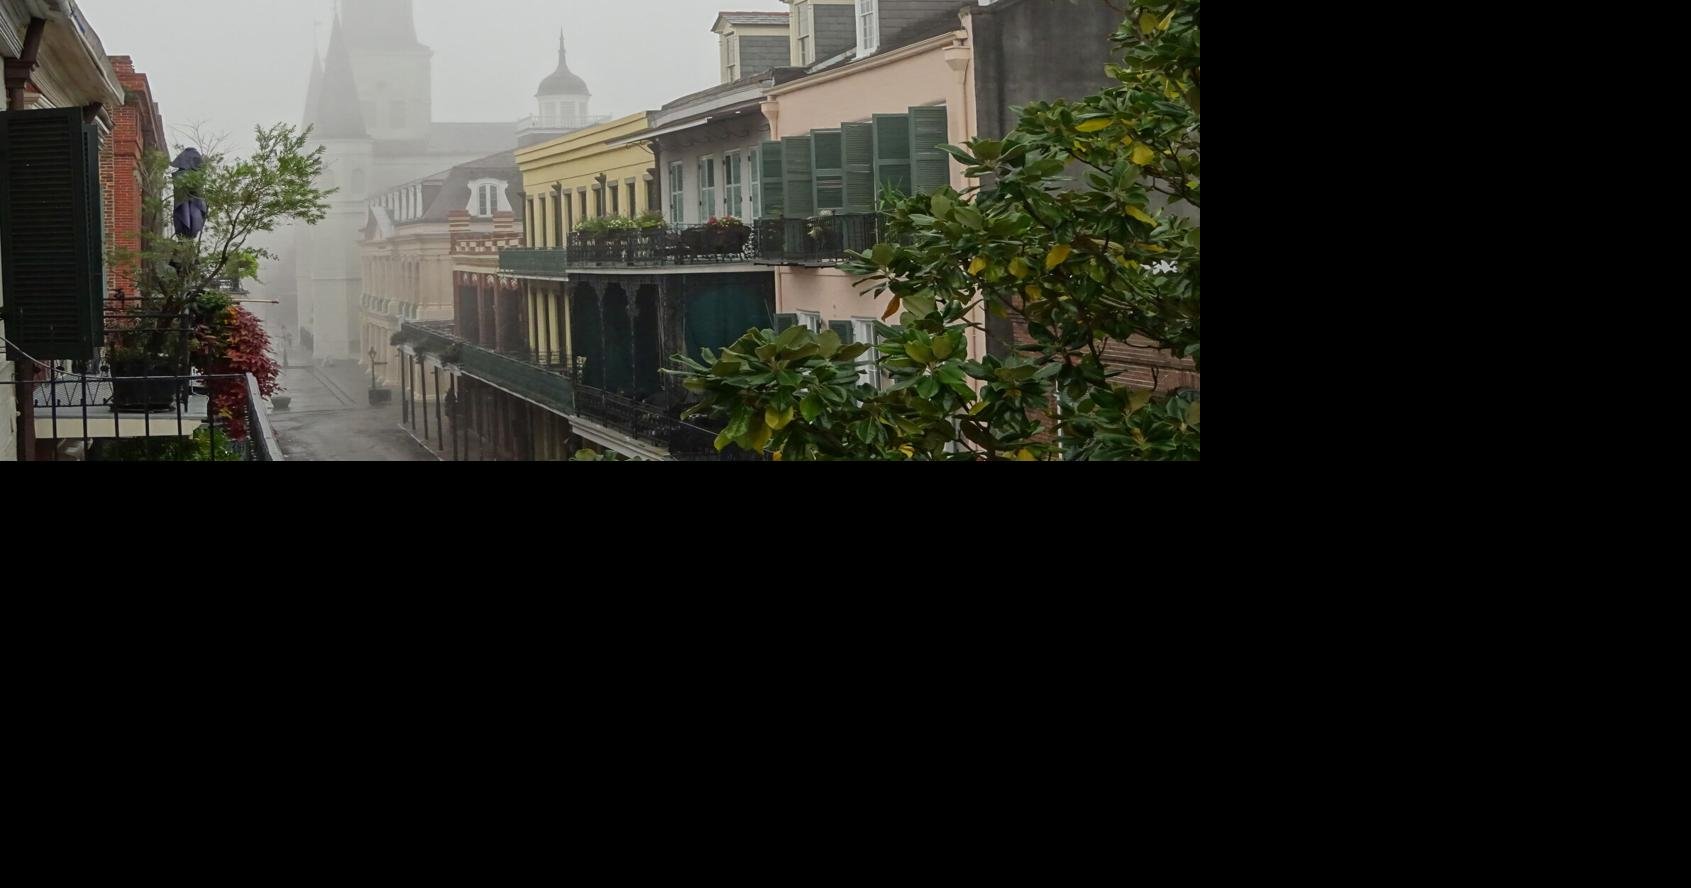 Another dense fog advisory issued for southeast Louisiana